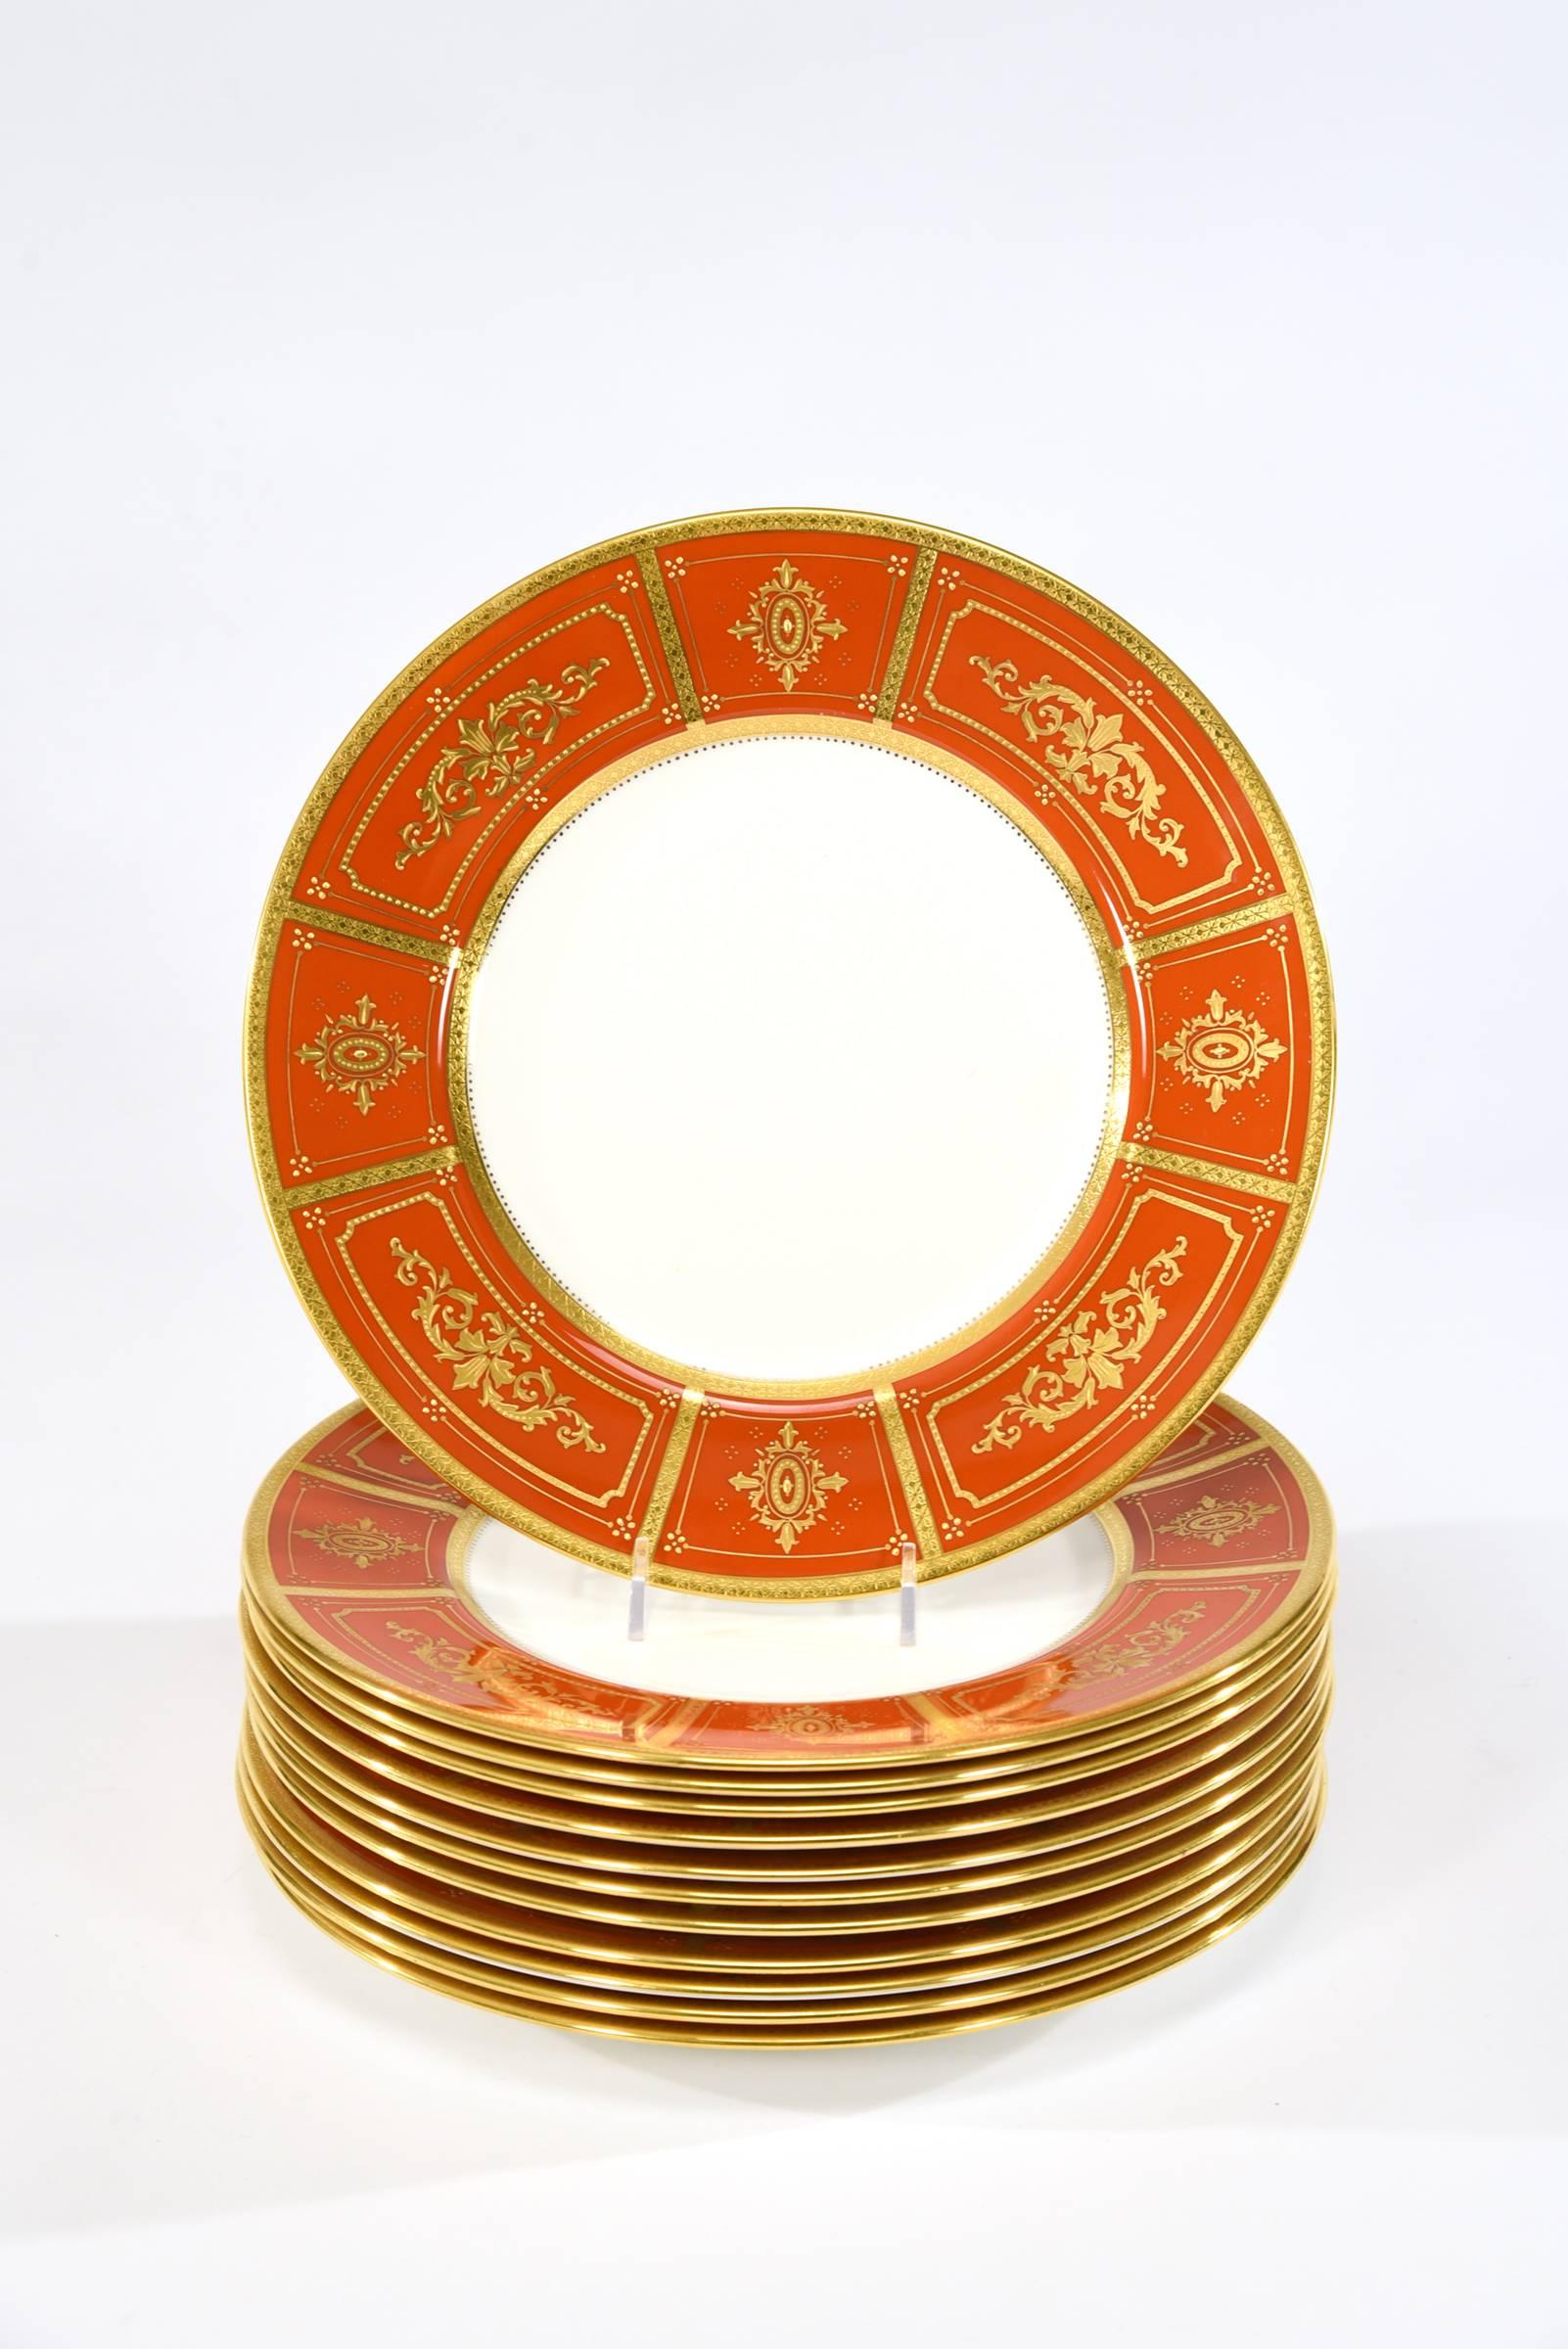 This is a gorgeous set of 12 Mintons dinner plates with bittersweet orange borders which are decorated with raised paste gold in a neoclassical motif and trimmed with an acid-etched gold border. A rare color, these dinner or service plates exemplify